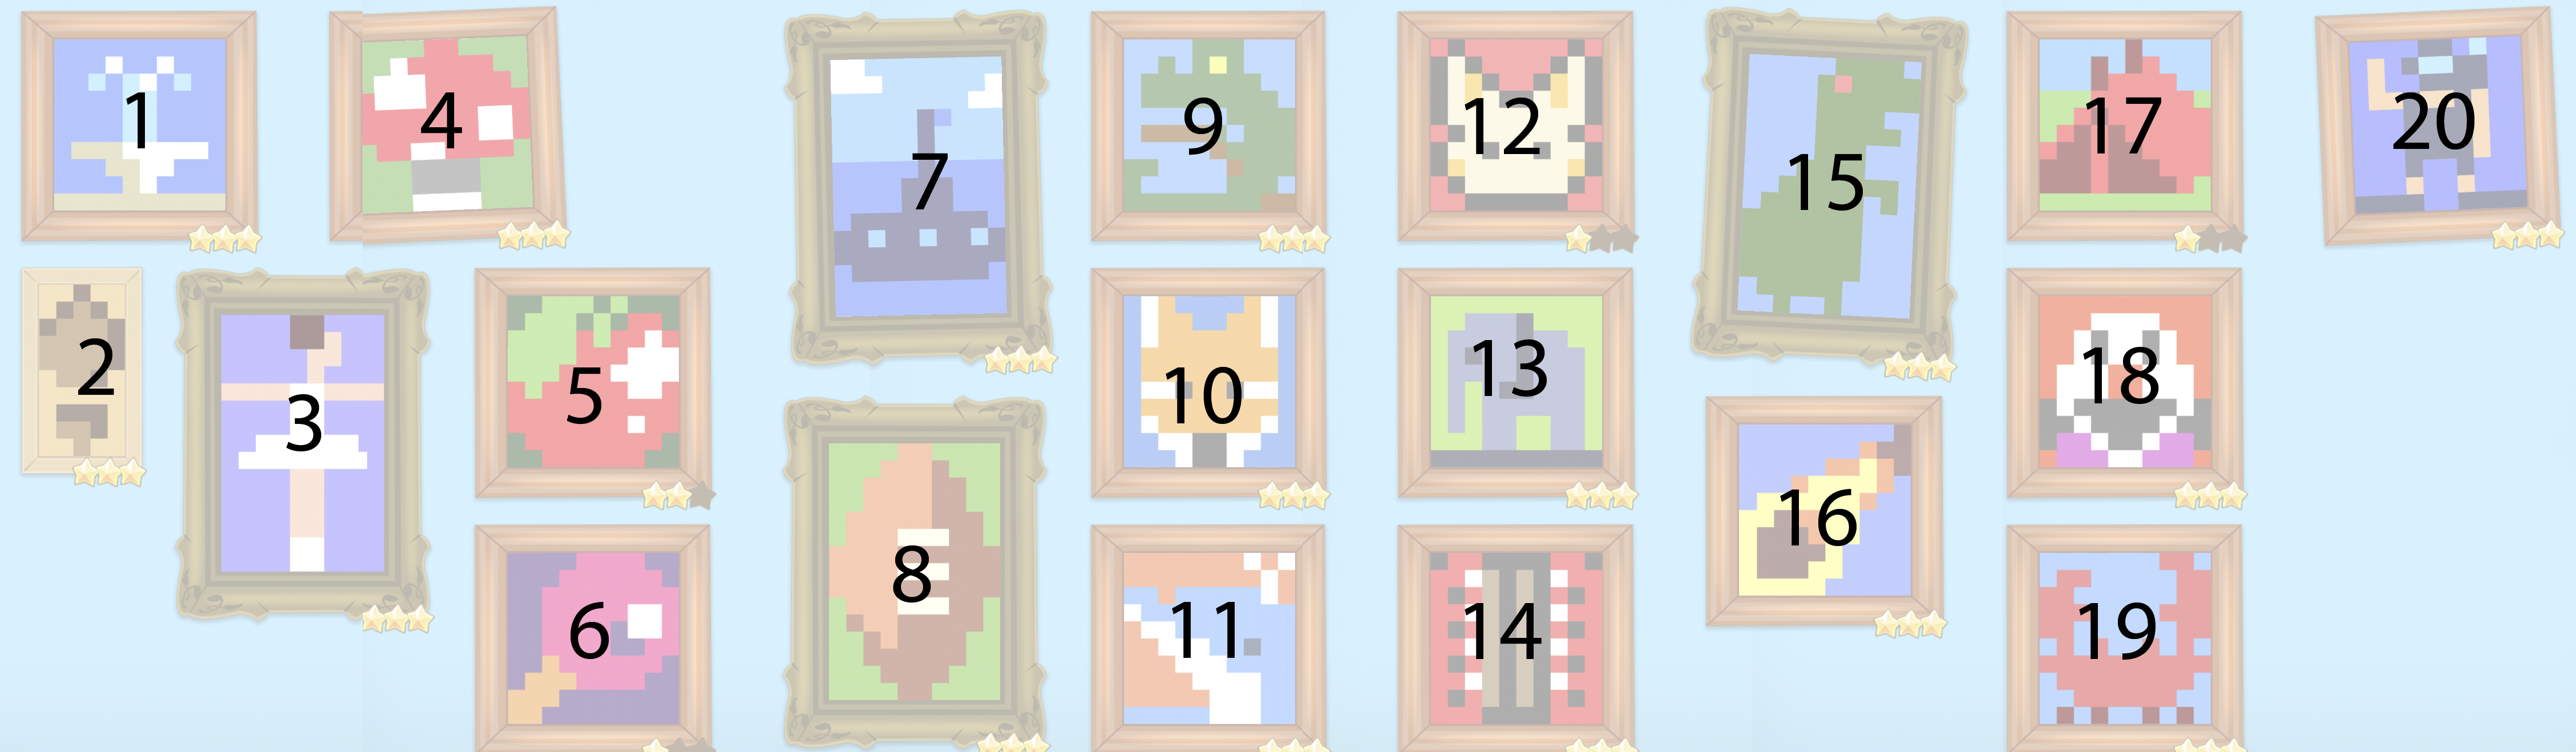 Hungry Cat Picross Medium Gallery 2 Solutions